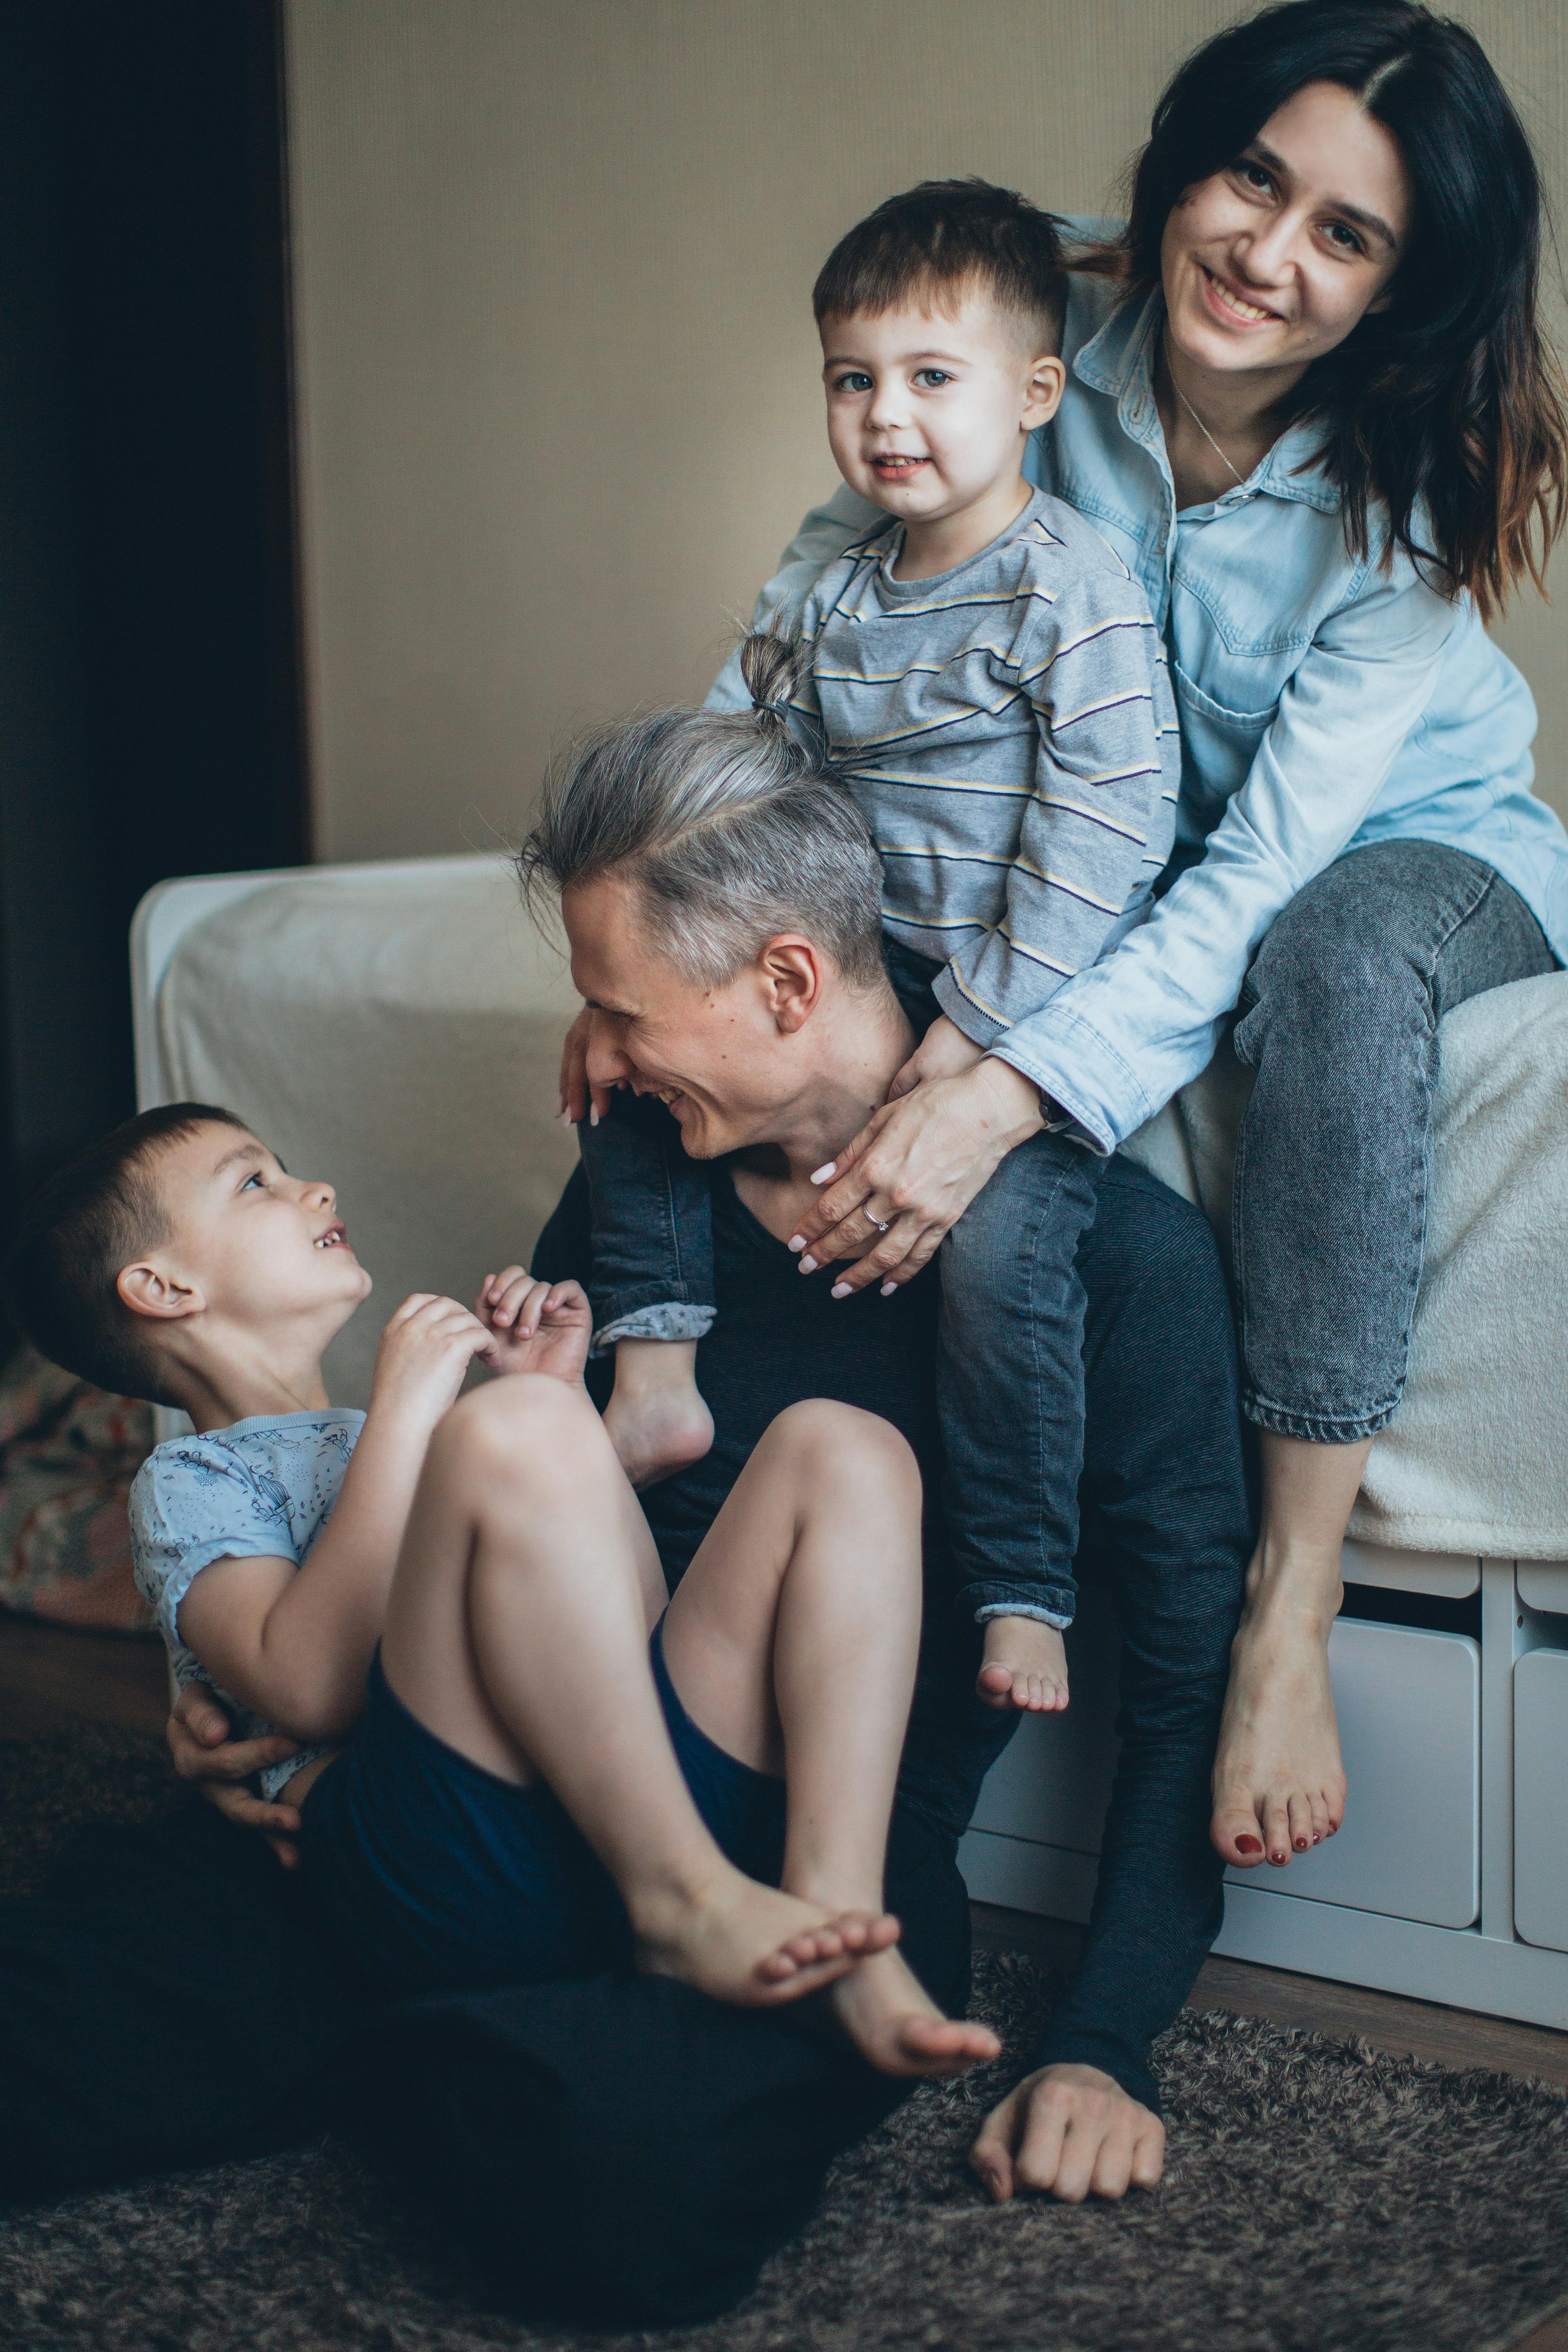 A happy family of four. For illustration purposes only | Source: Pexels